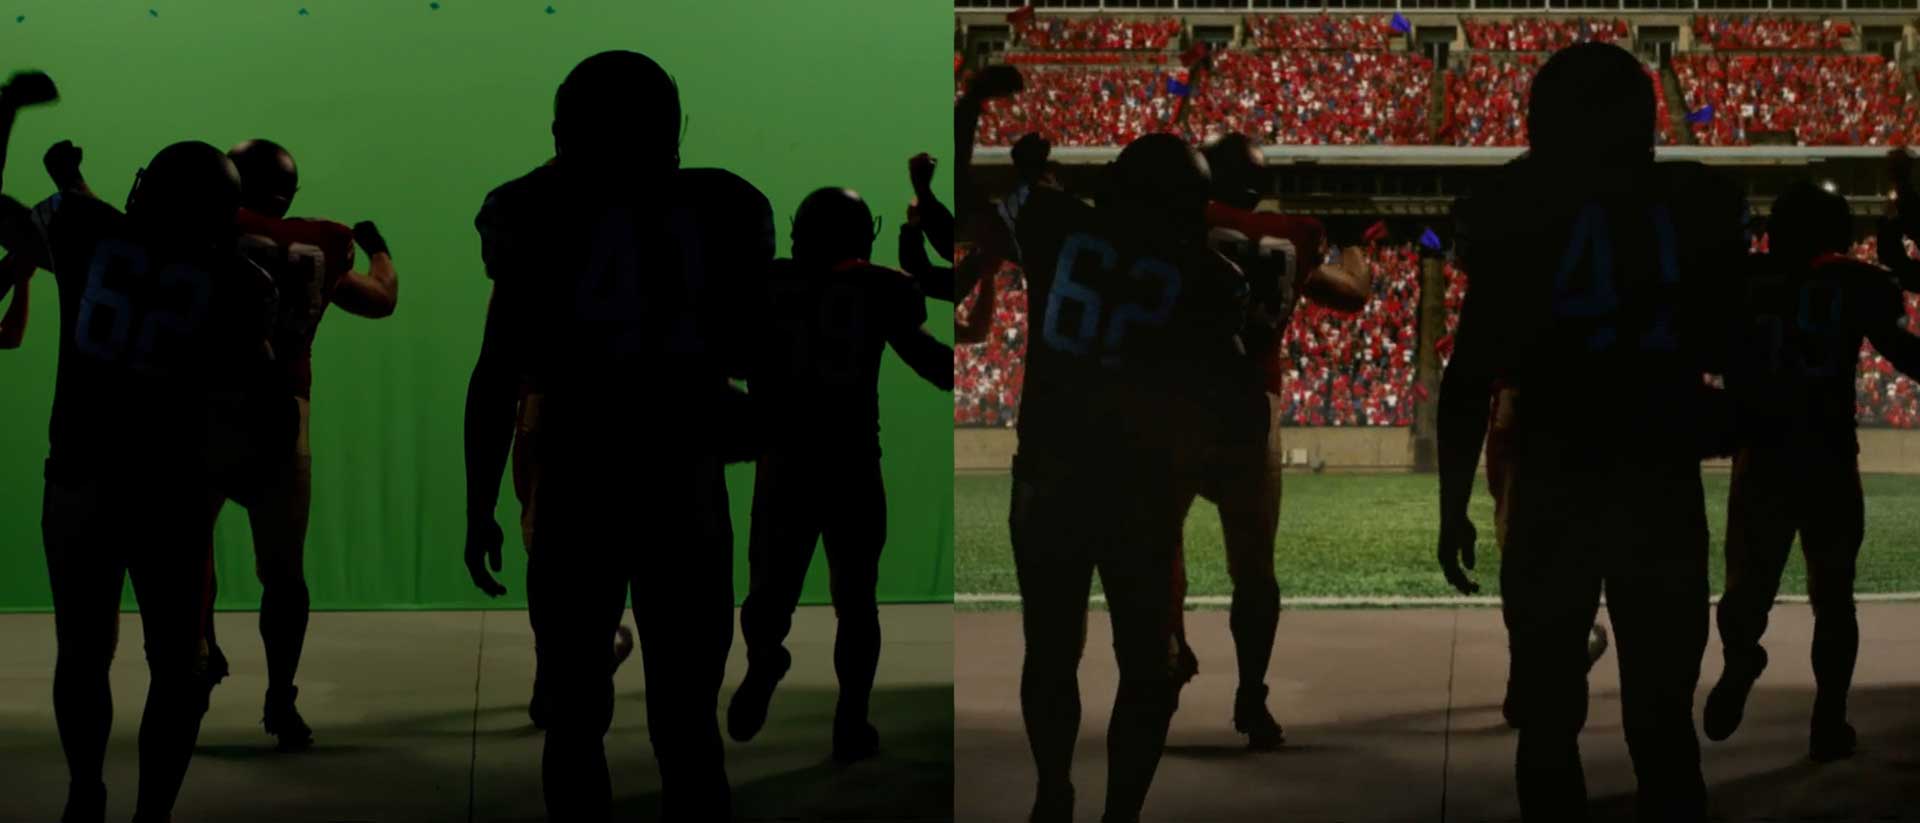 New Sports & Concert Crowd VFX | Make Crowd Replication Easier & Cheaper